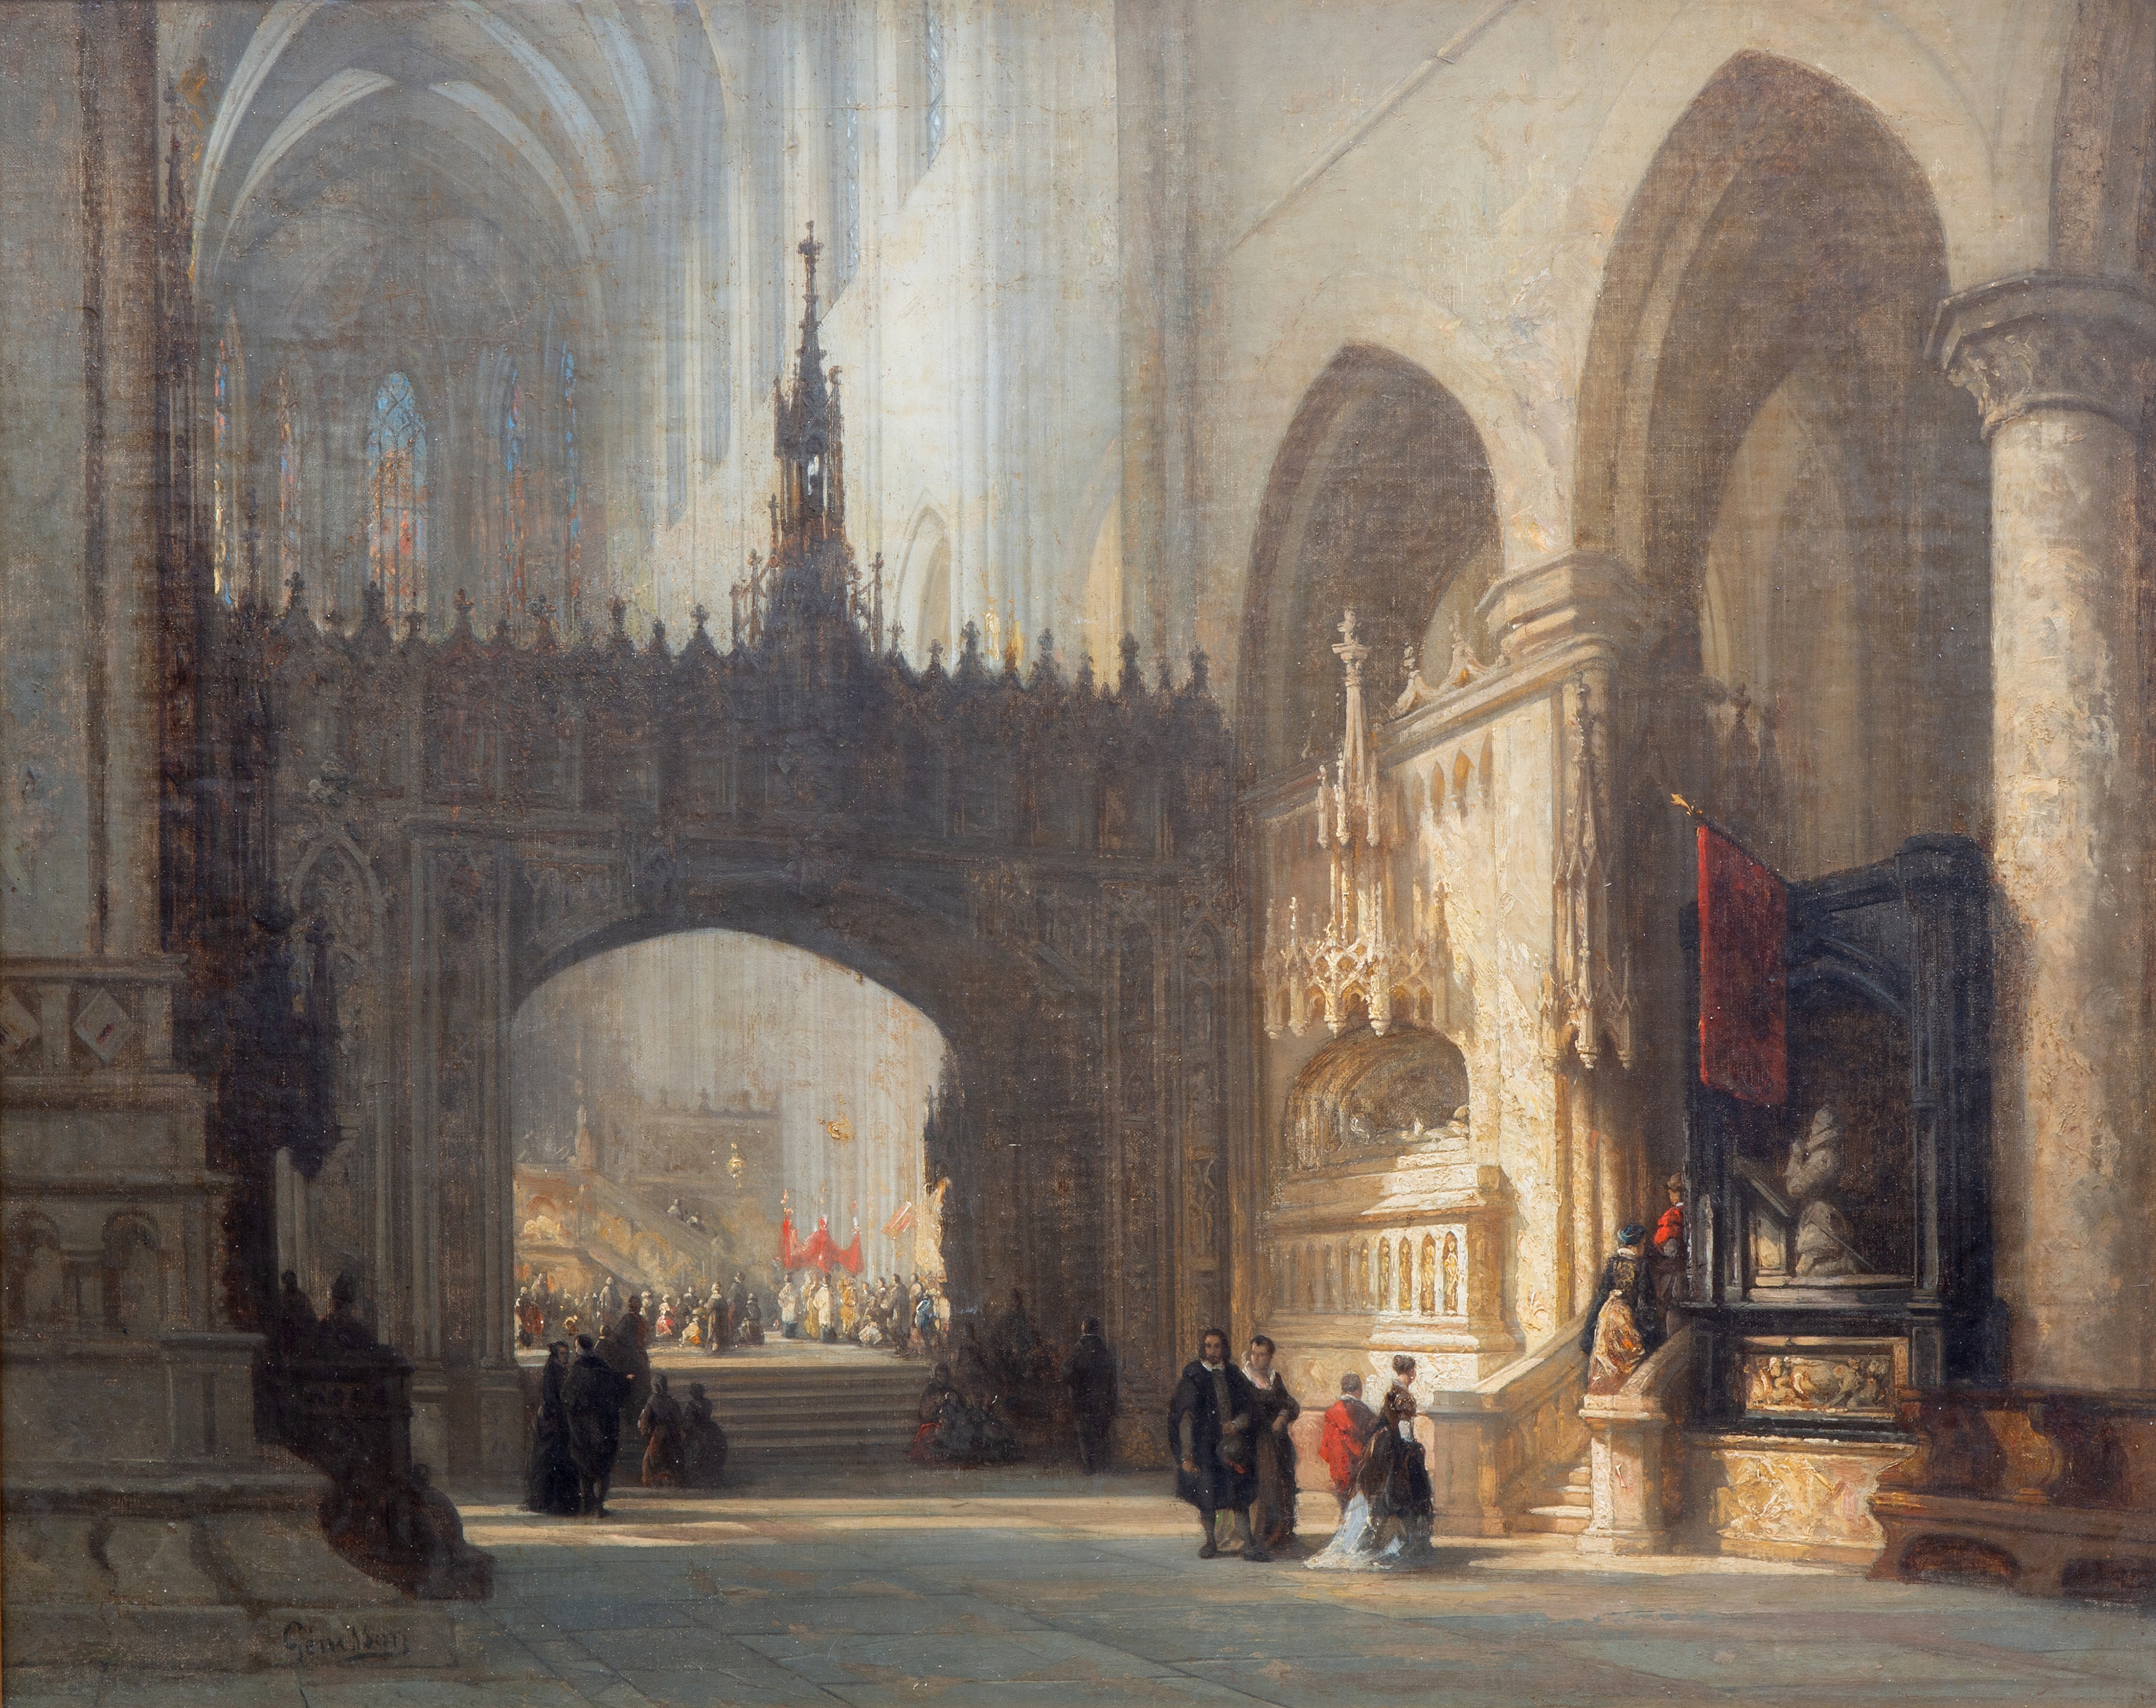 Artwork by Jules Victor Genisson, A Gothic cathedral interior with many figures, Made of oil on canvas